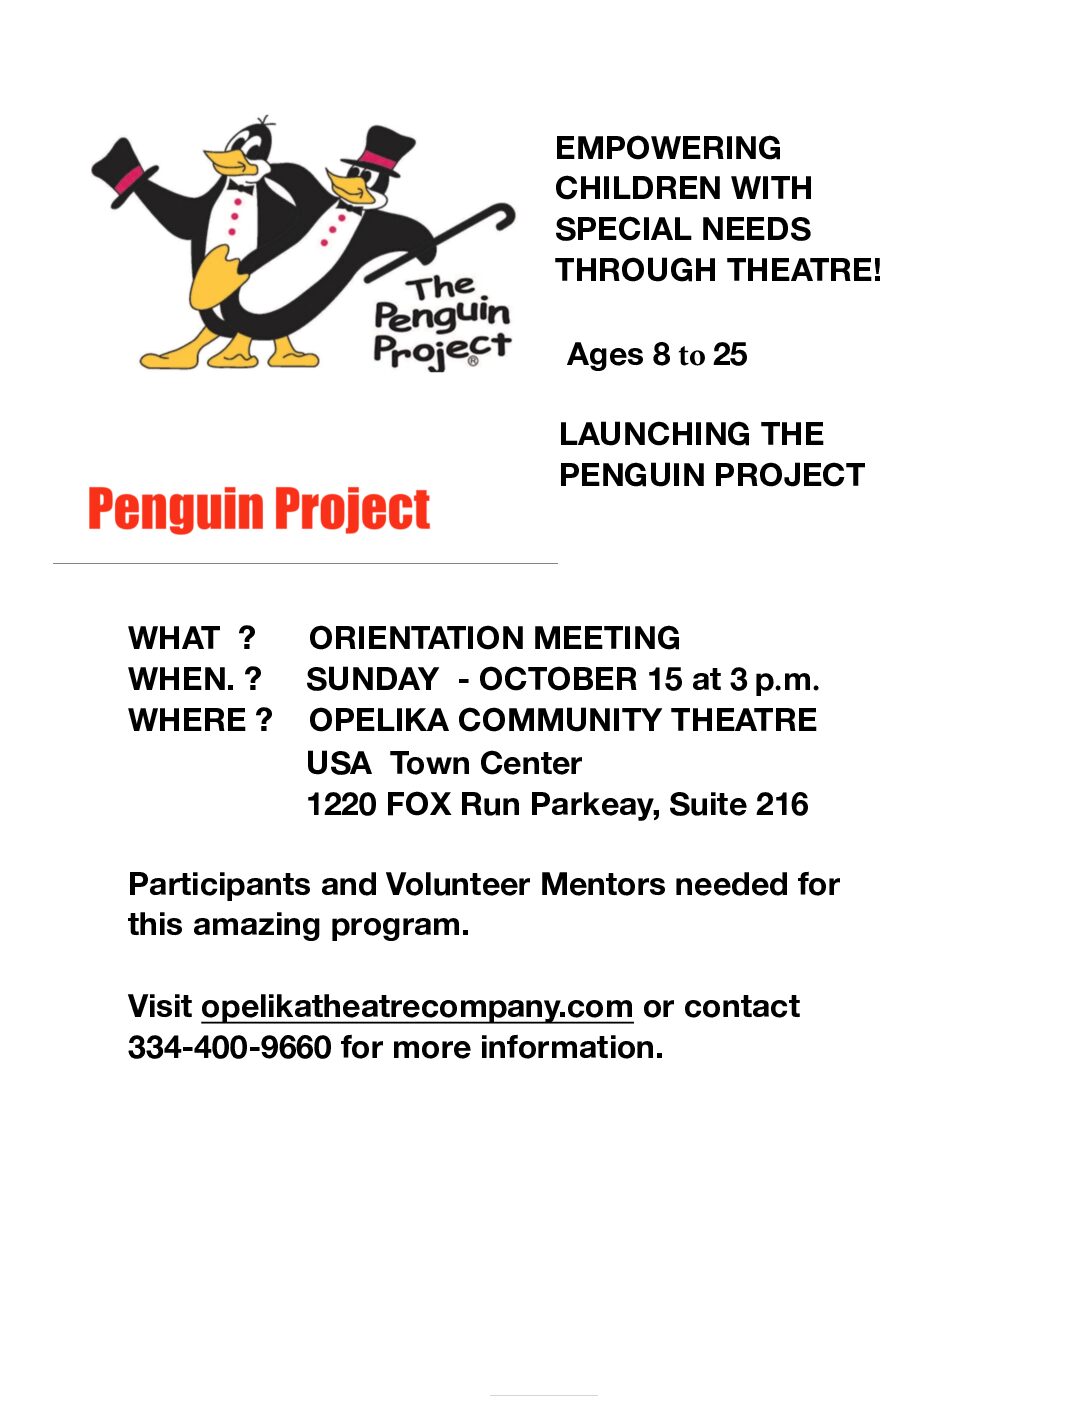 OCT to Host Informational Meeting on the Penguin Project Oct. 15